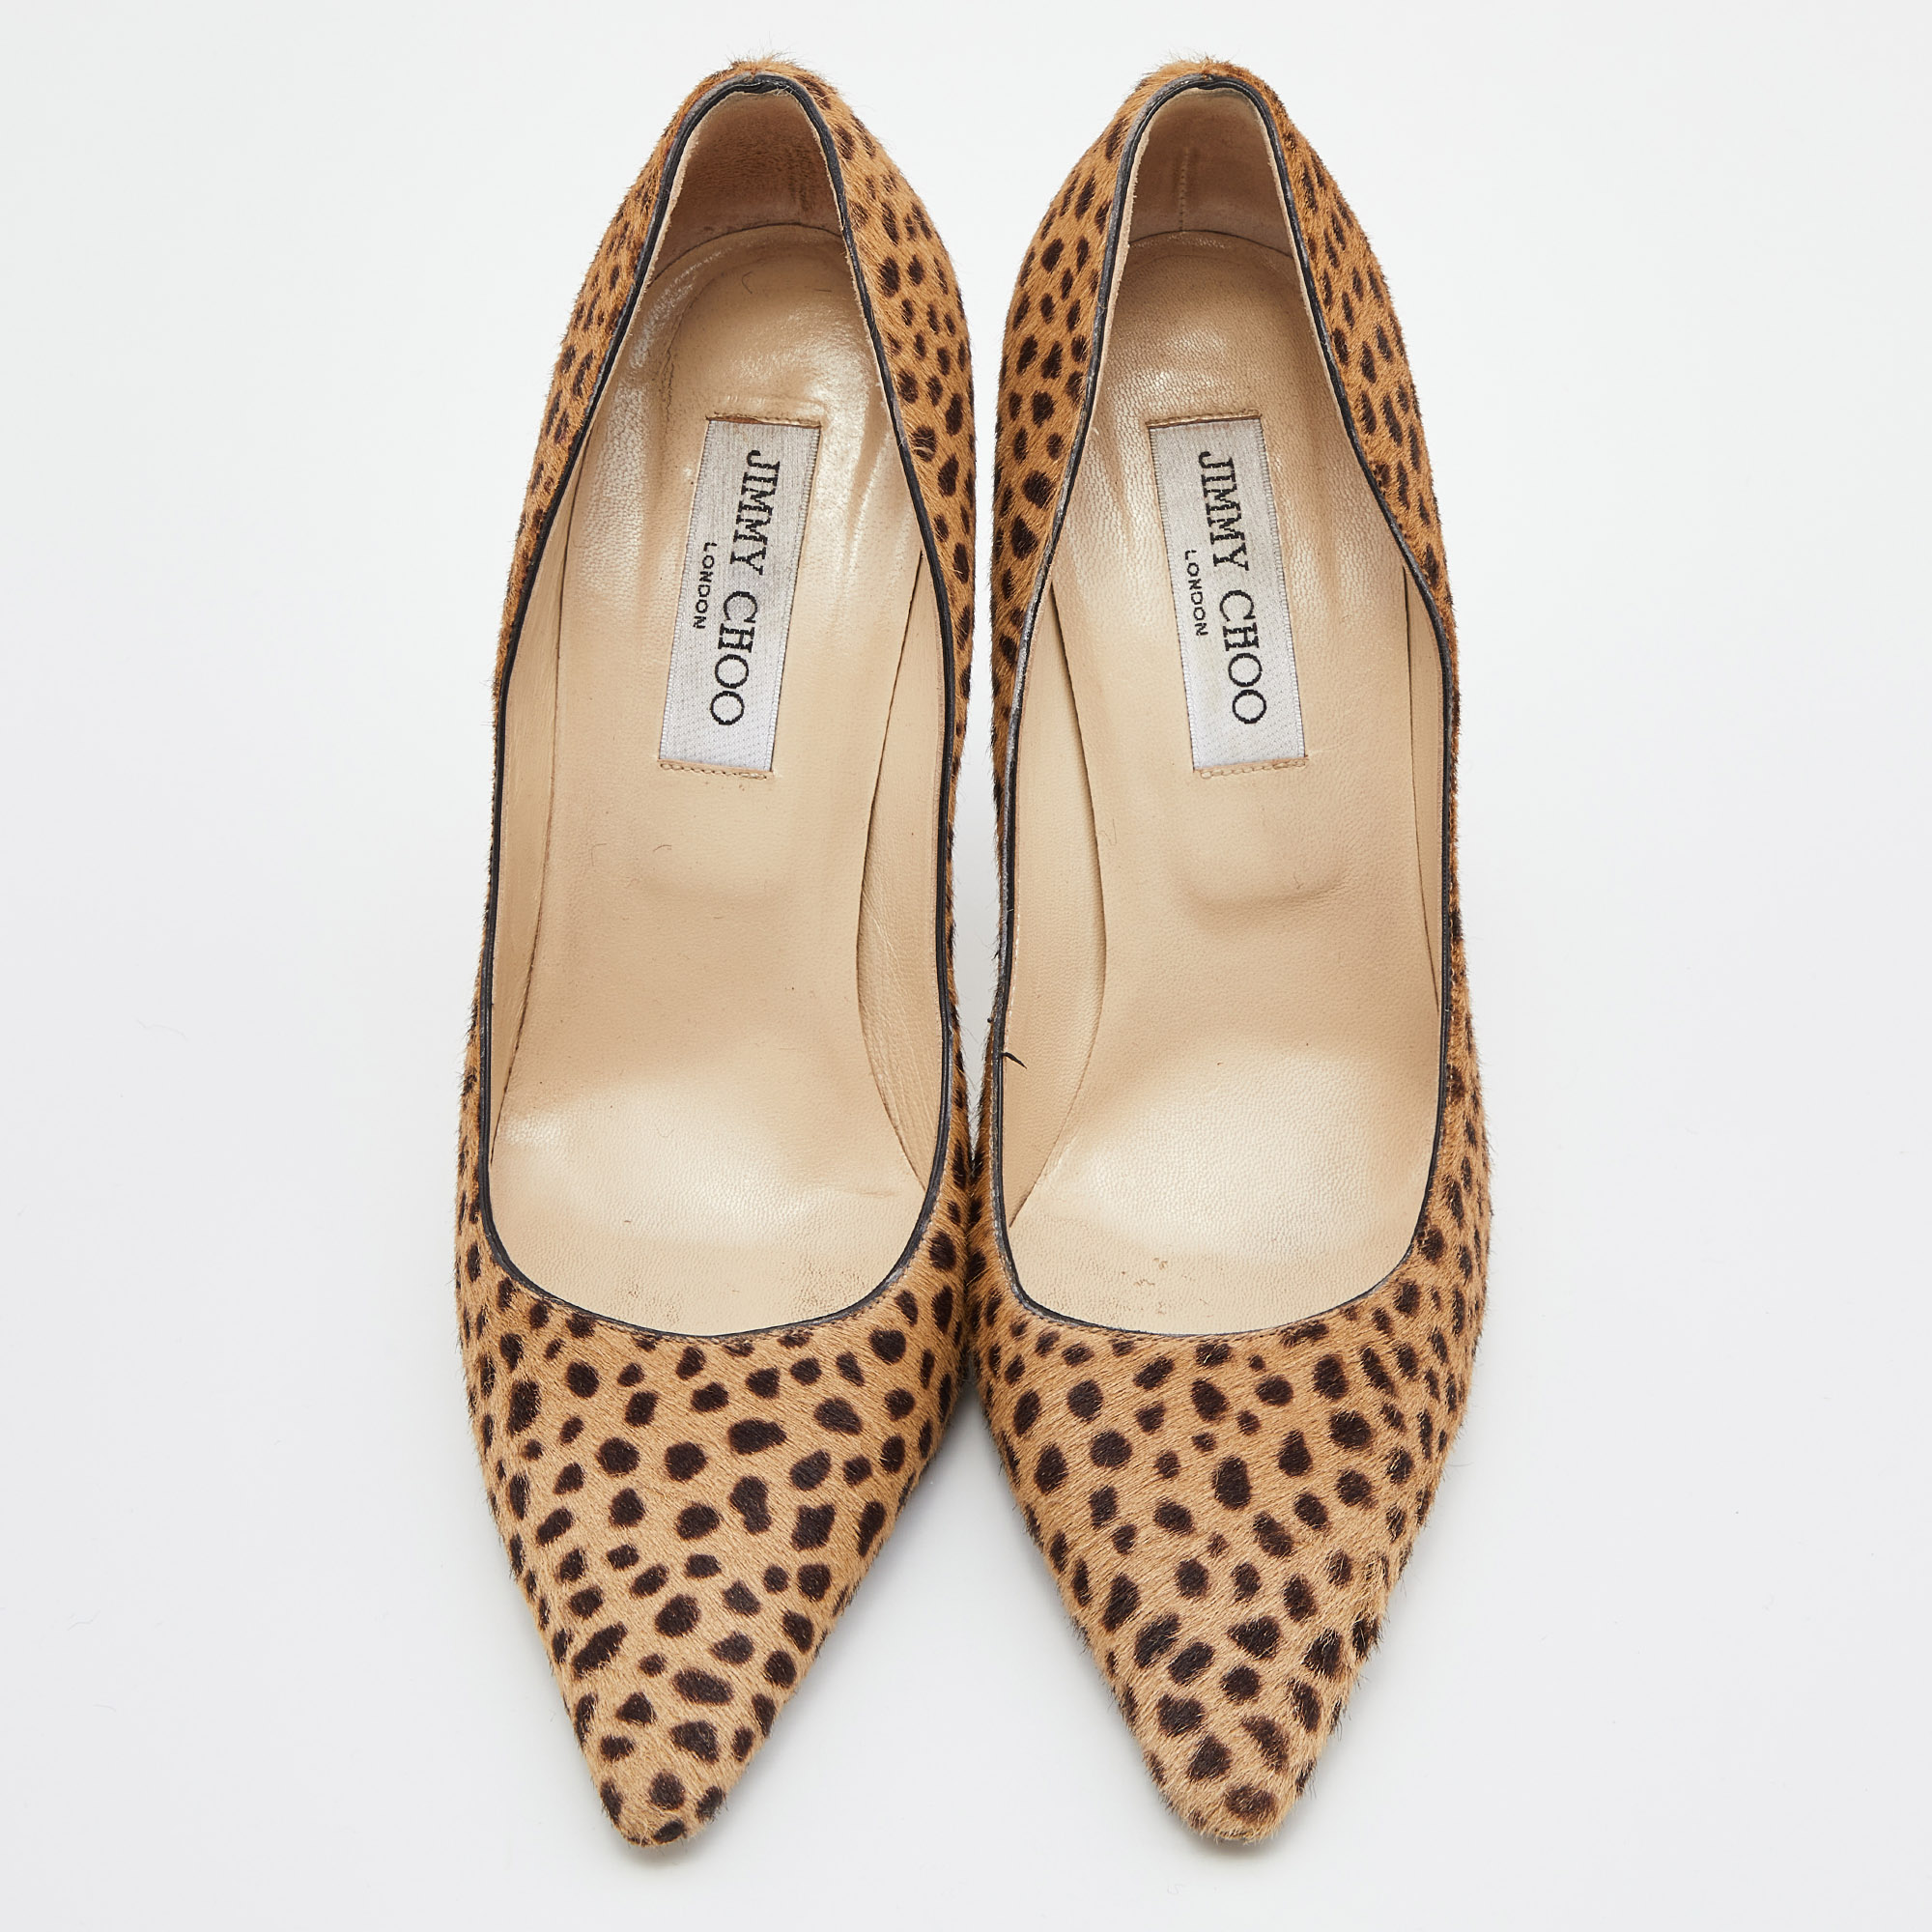 Jimmy Choo Brown Leopard Print Calfhair Pointed Toe Pumps Size 39